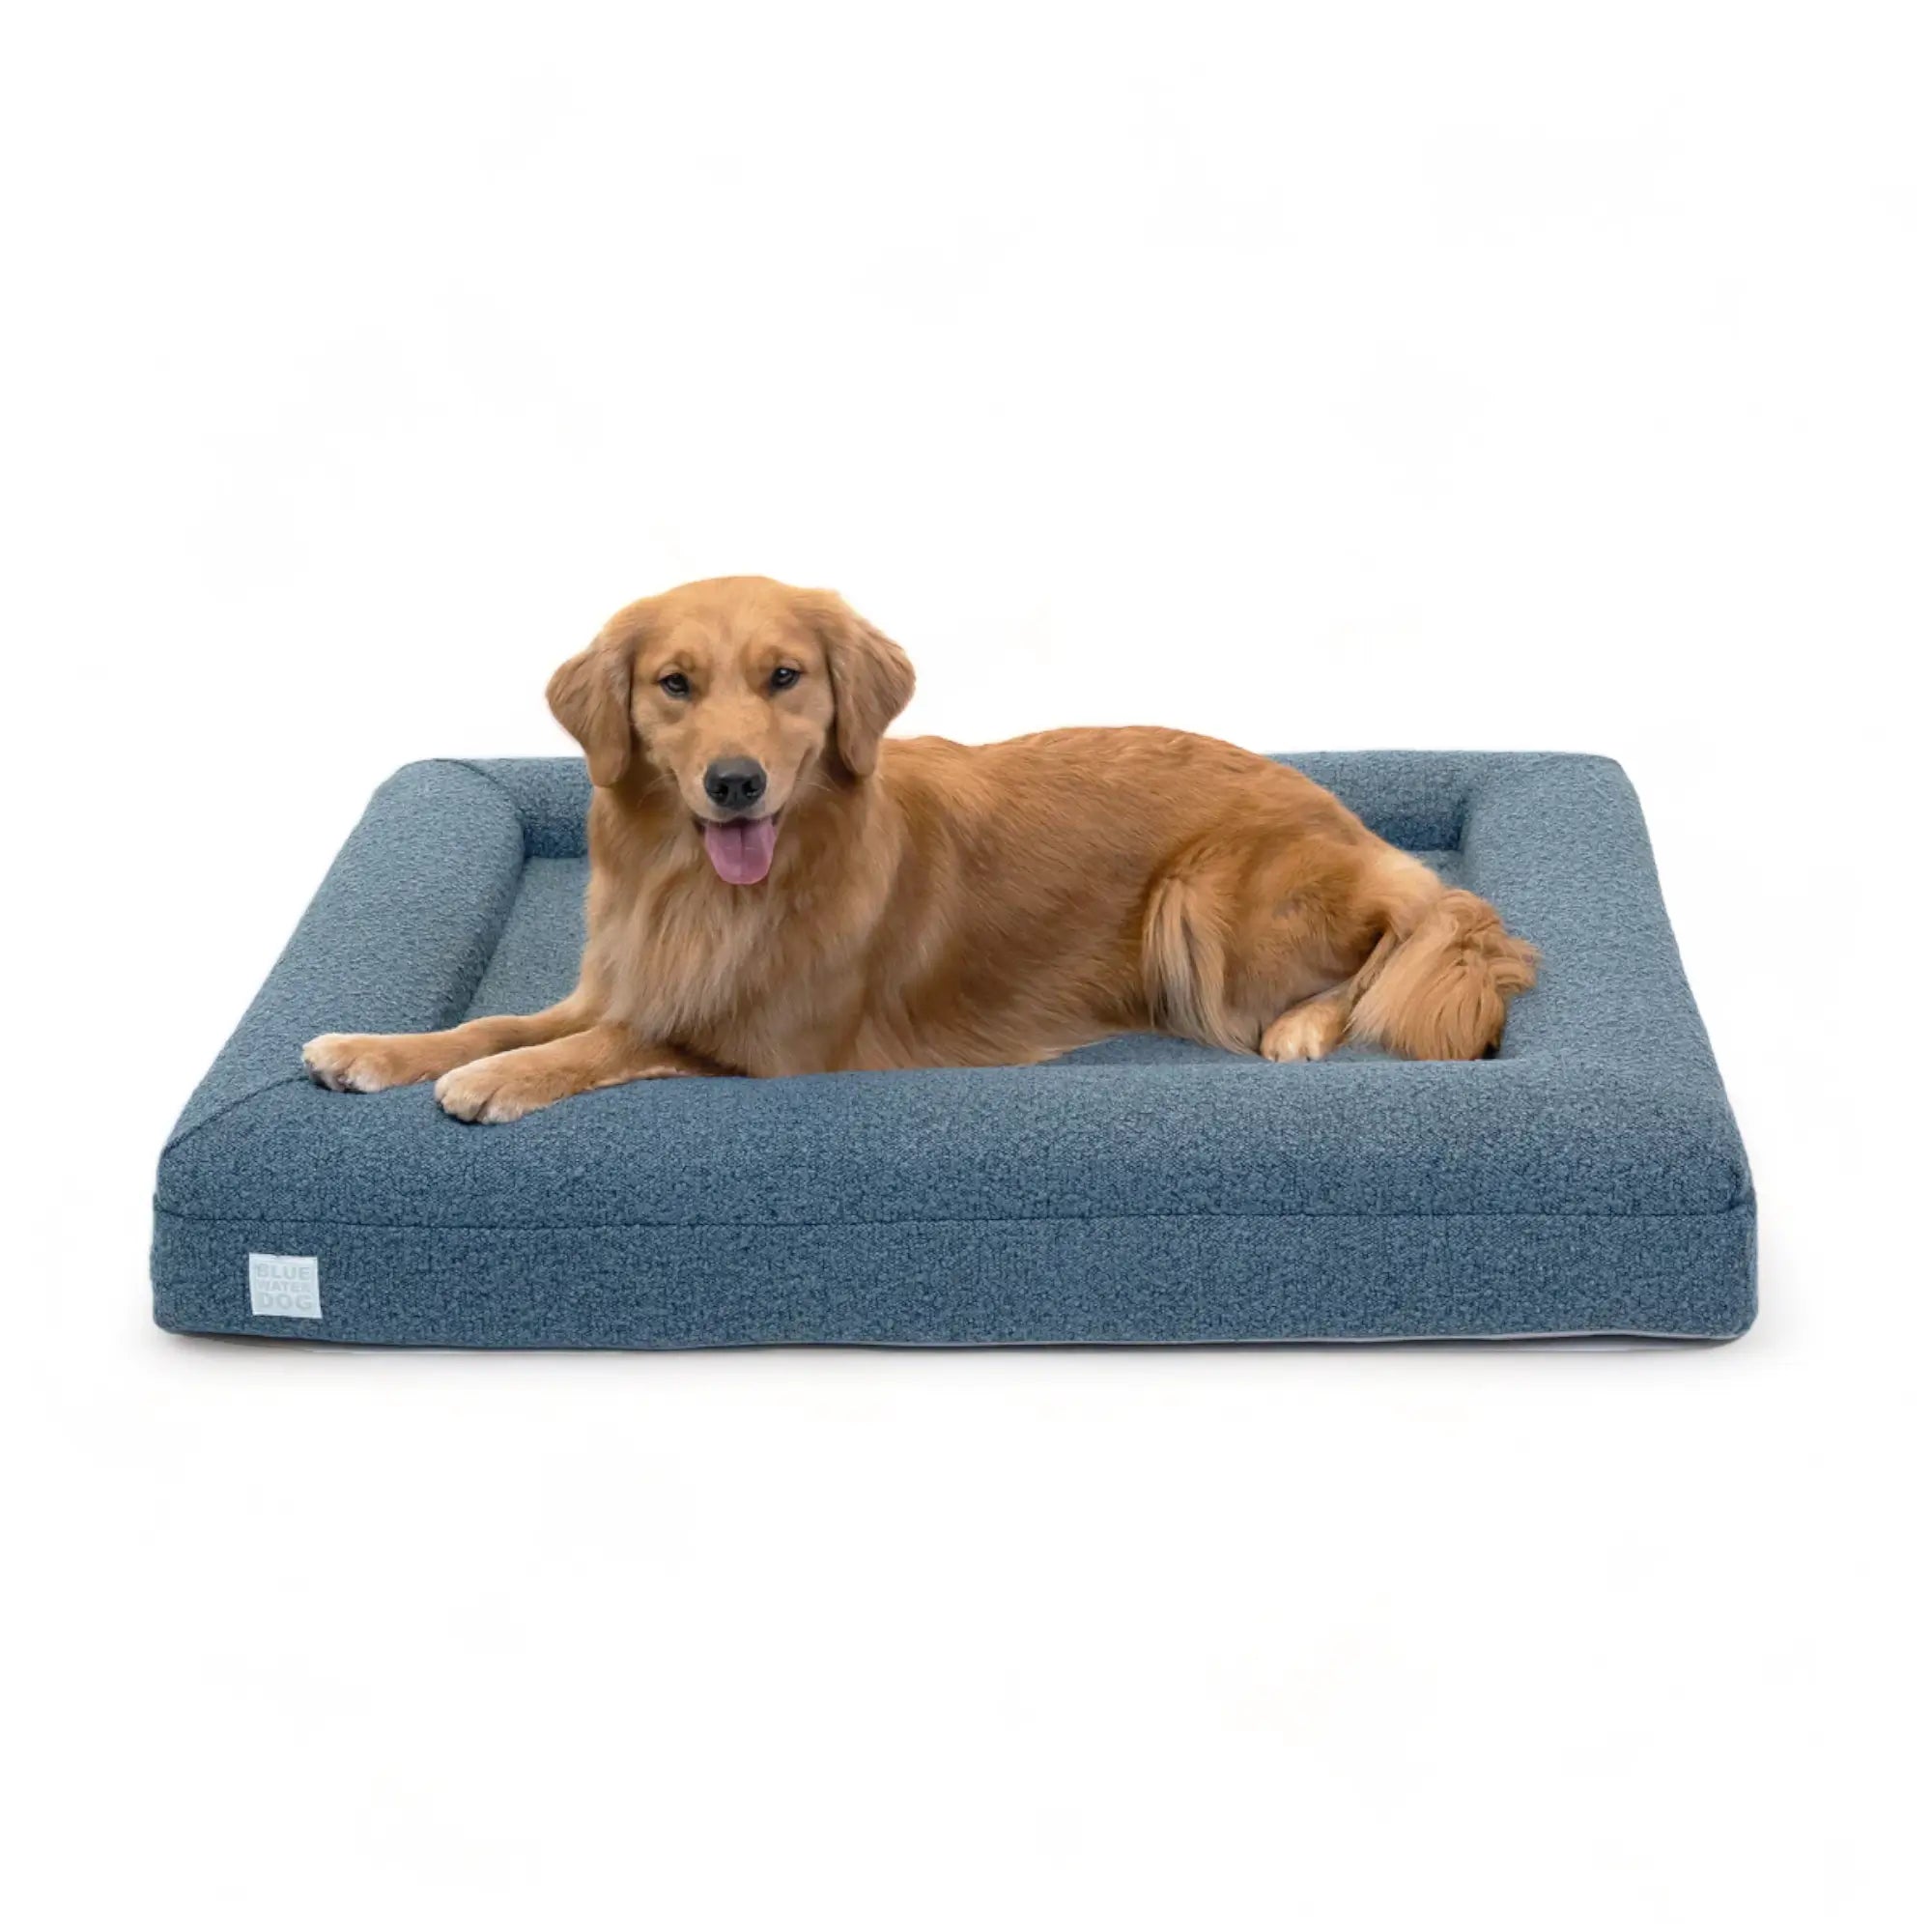 Golden Retriever laying on a large, blue-colored orthopedic memory foam boucle dog bed